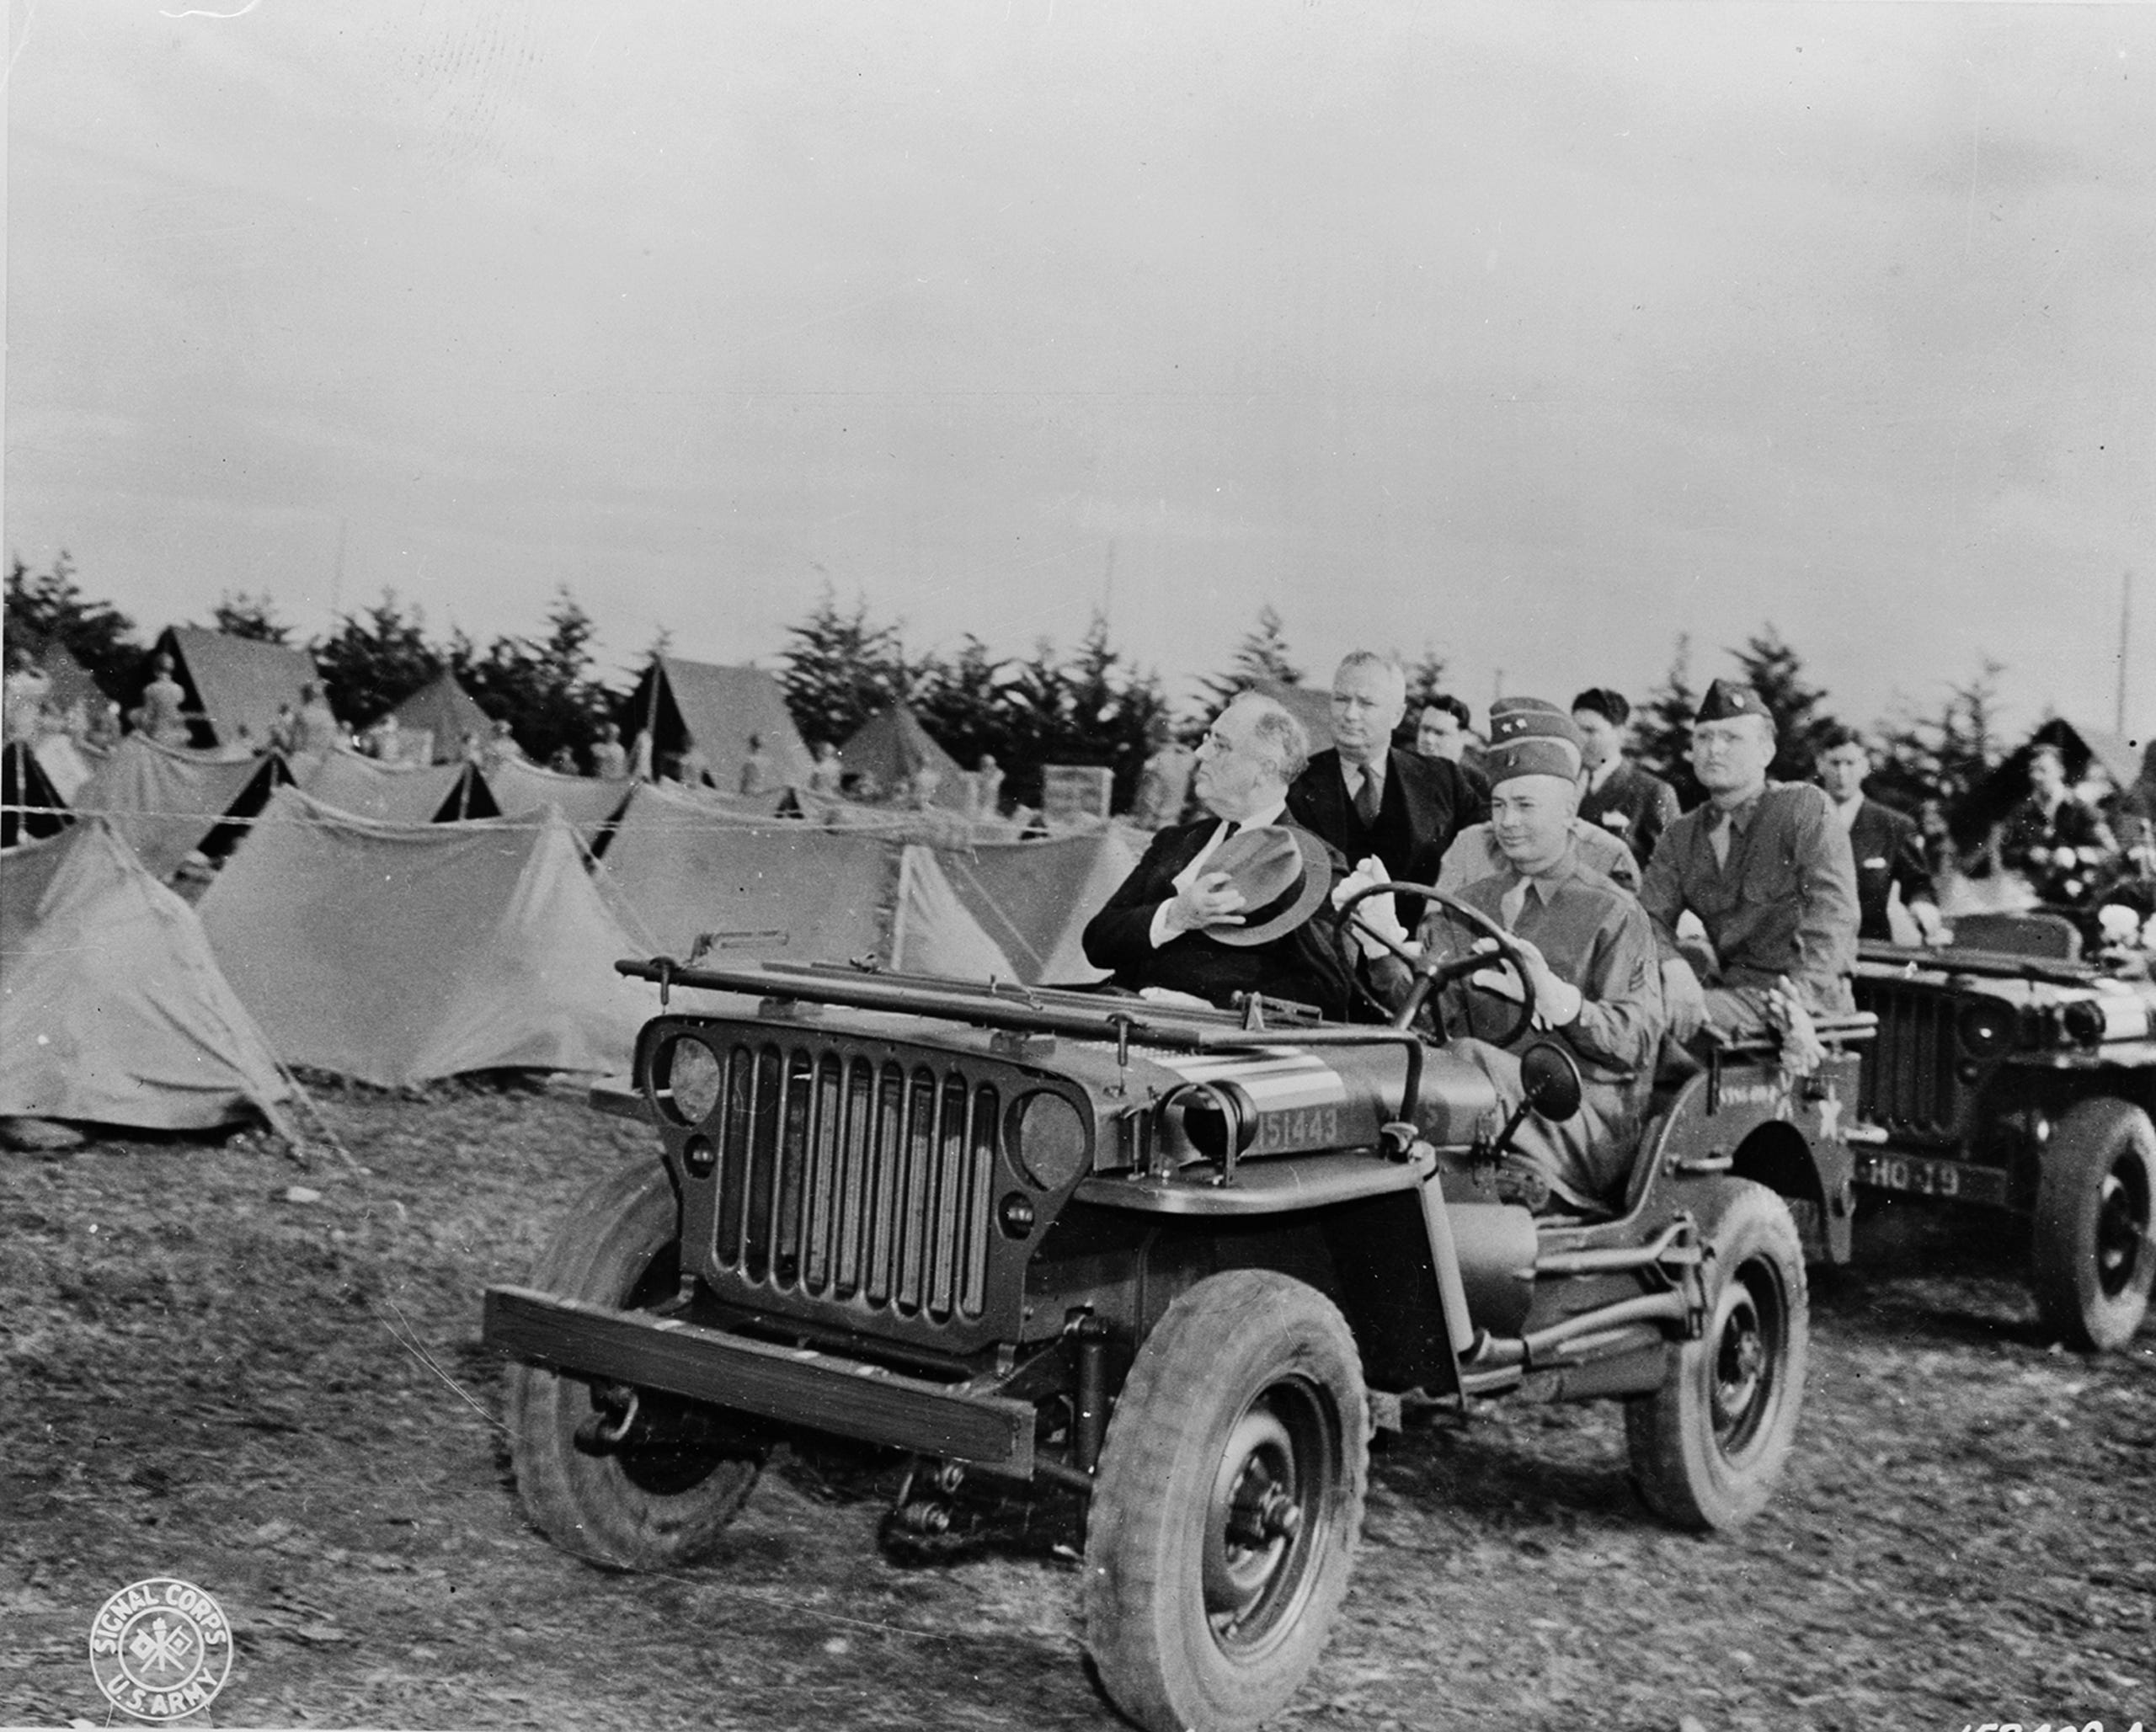 President Franklin Roosevelt reviews American troops from an Army jeep in Casablanca, Morocco, in January, 1943.